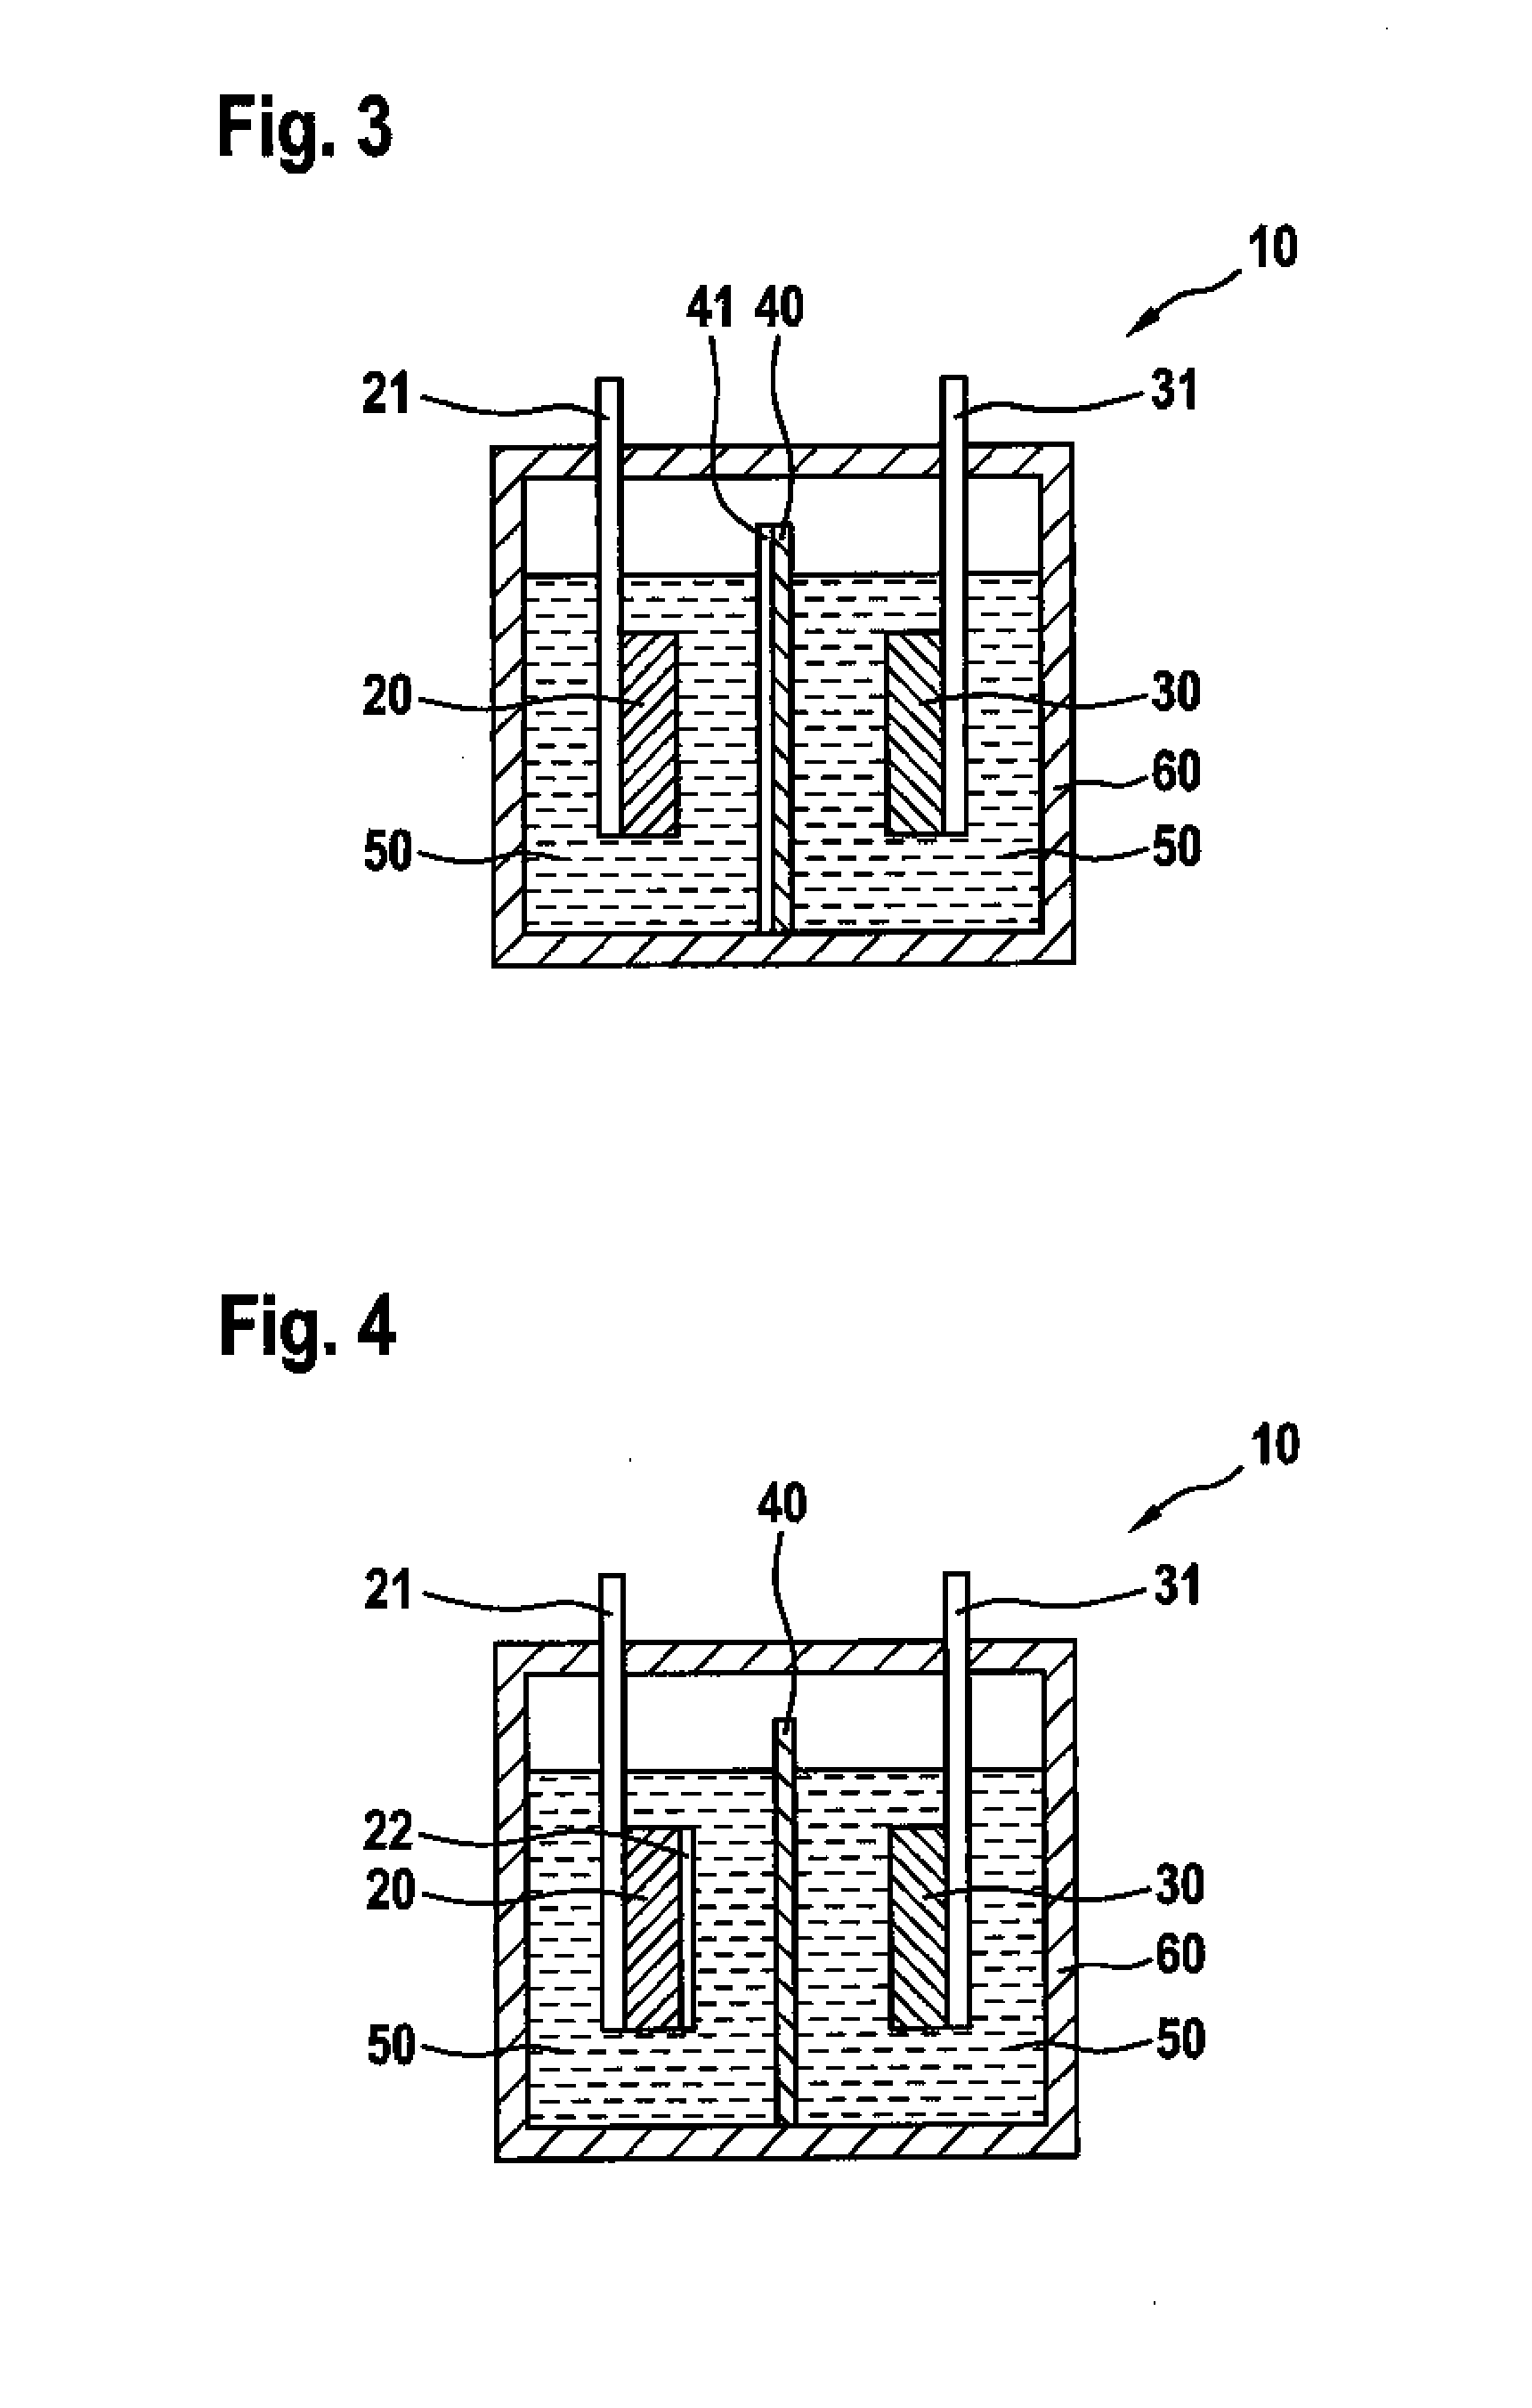 Method for reducing the dendritic metal deposition on an electrode and lithium-ion rechargeable battery which uses this method